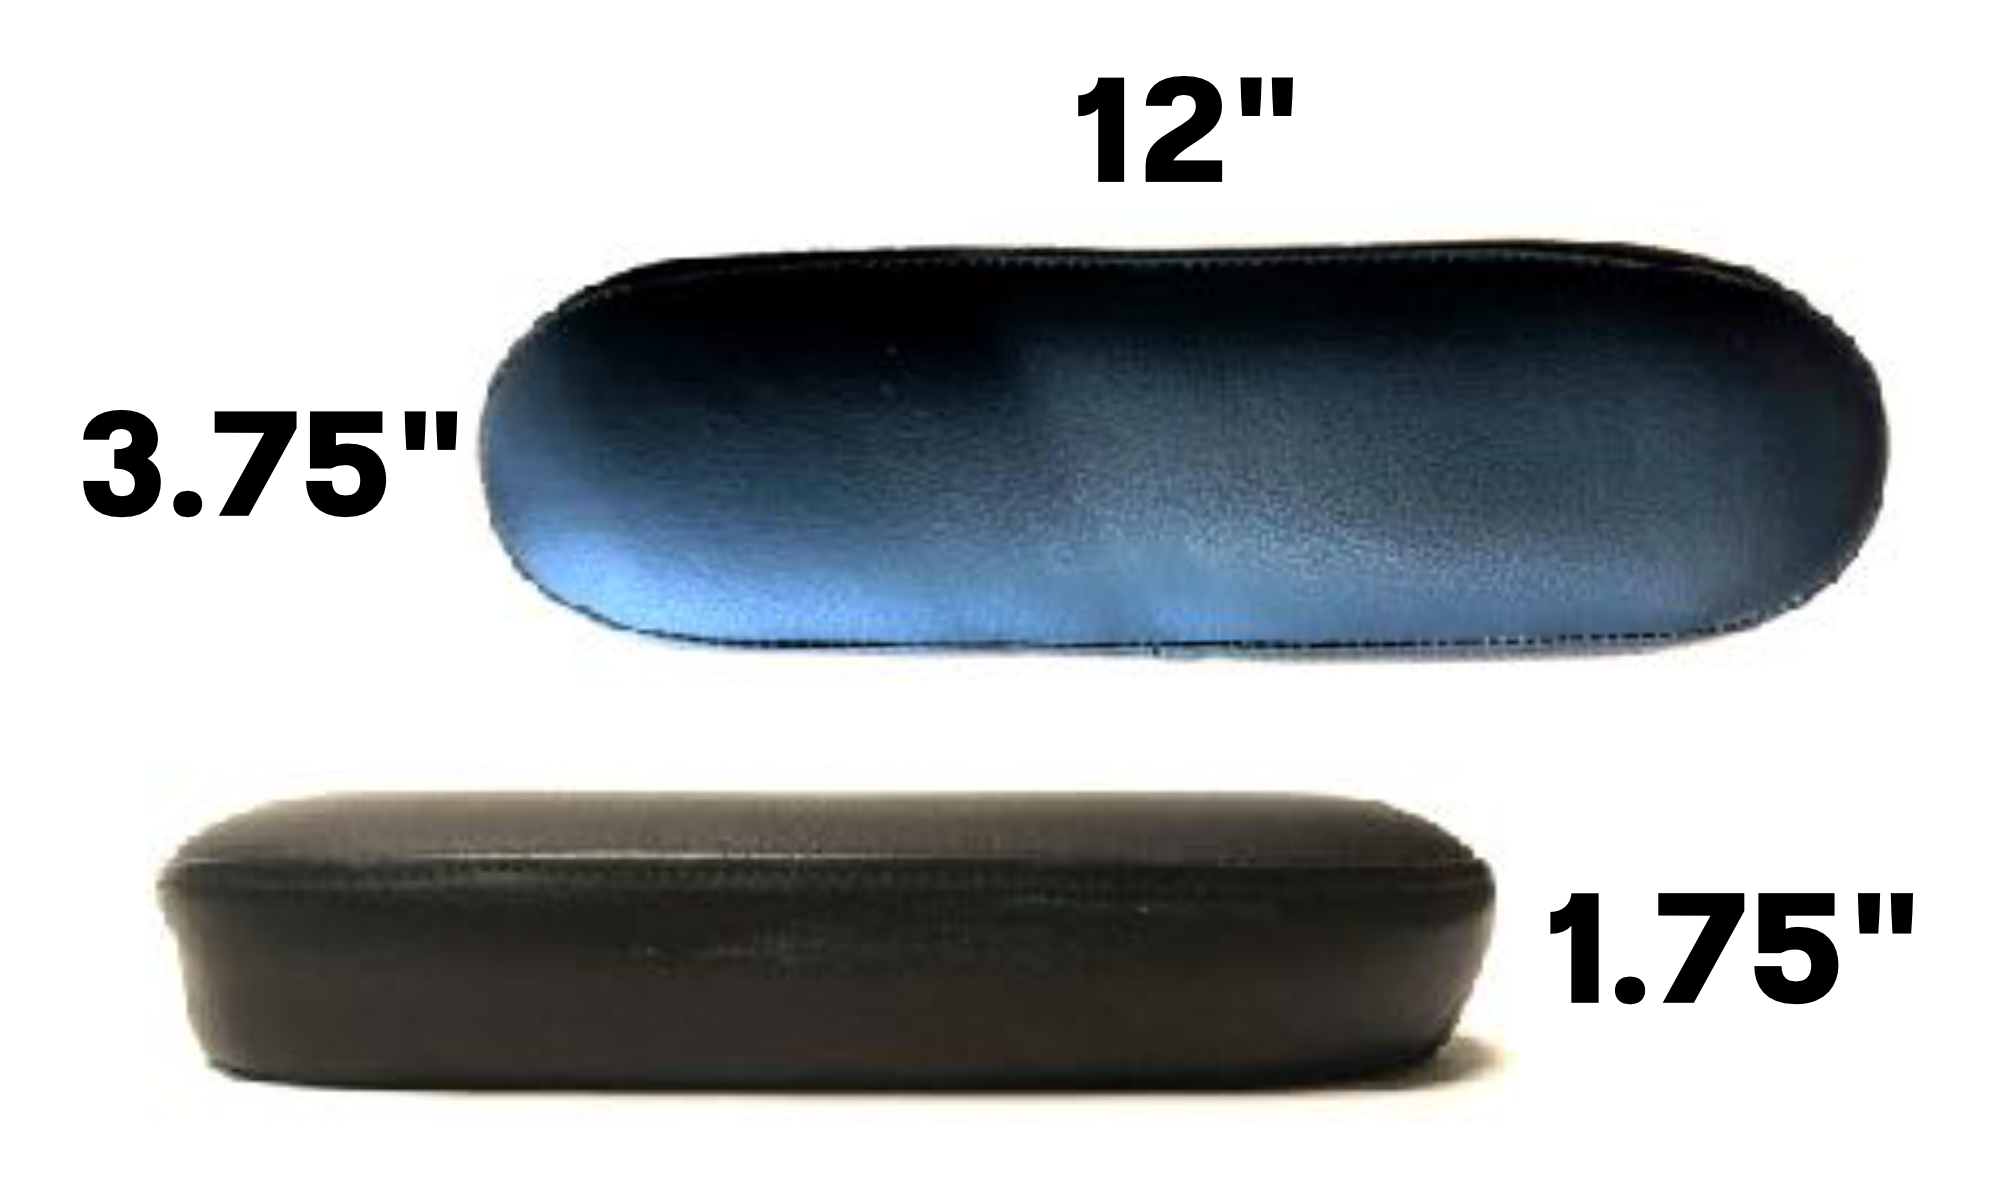 44P - High soft leather pad with plywood core